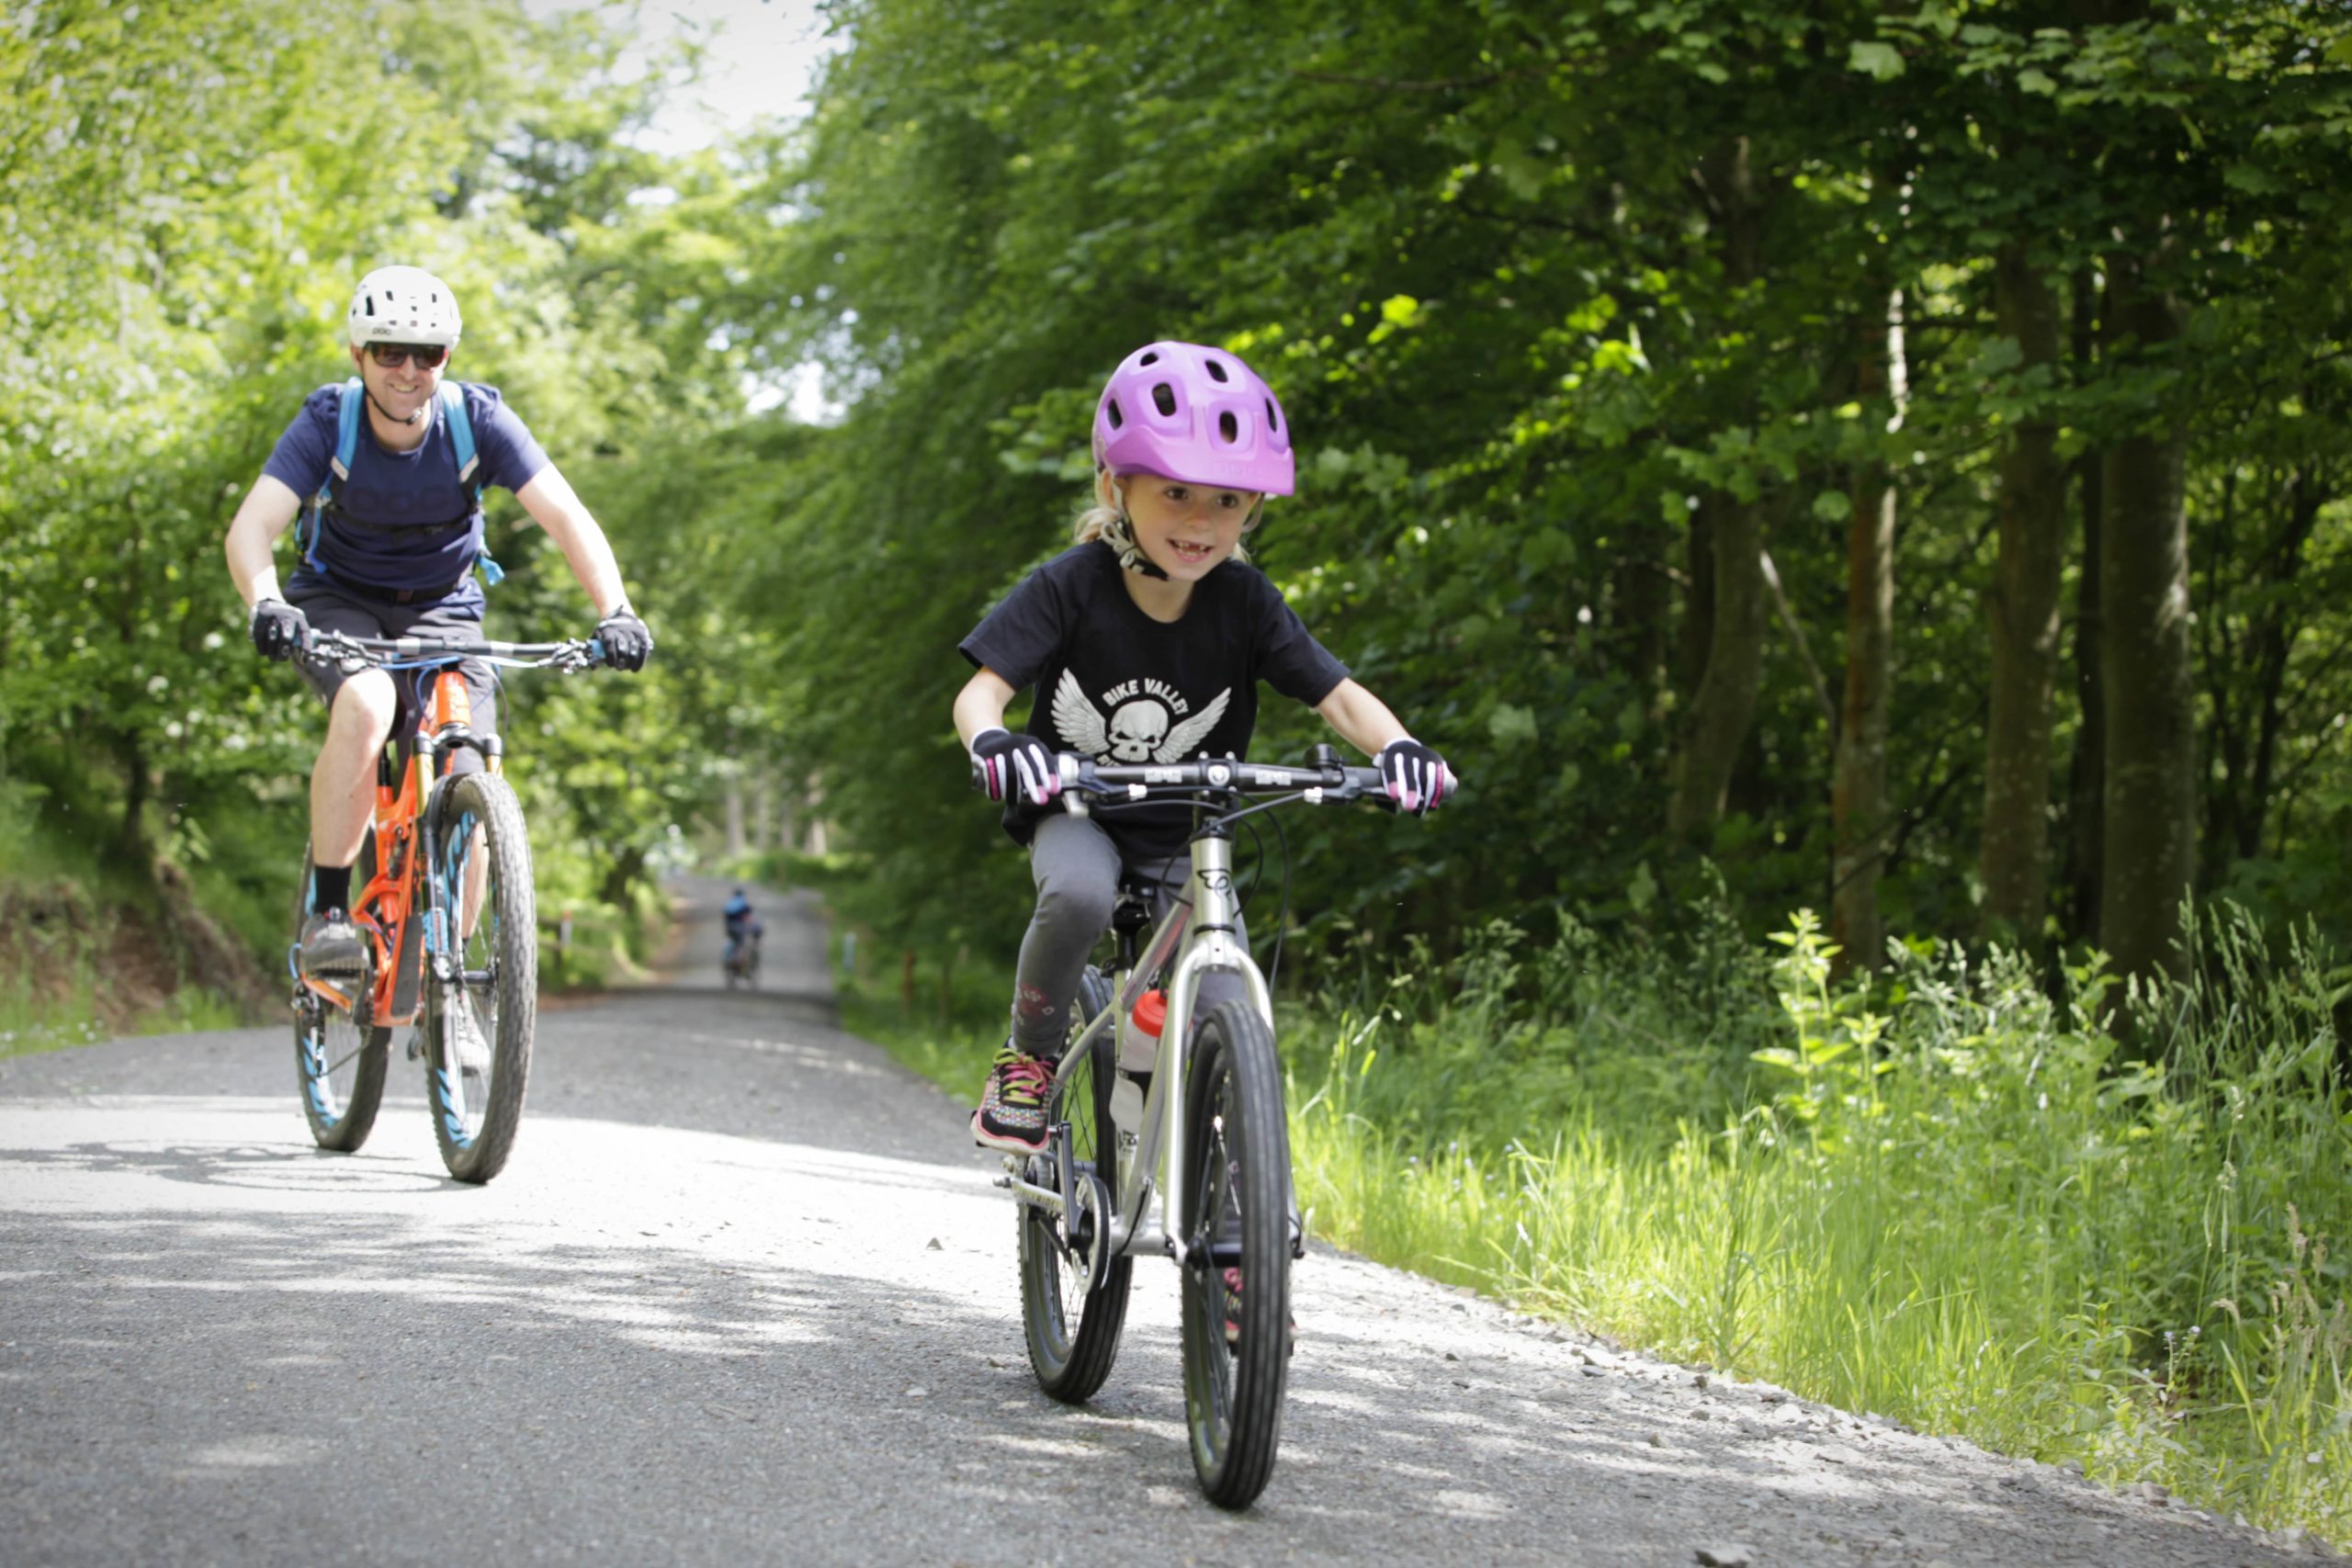 Cycling Scotland says safe, segregated infrastructure is key to keeping families on two wheels.